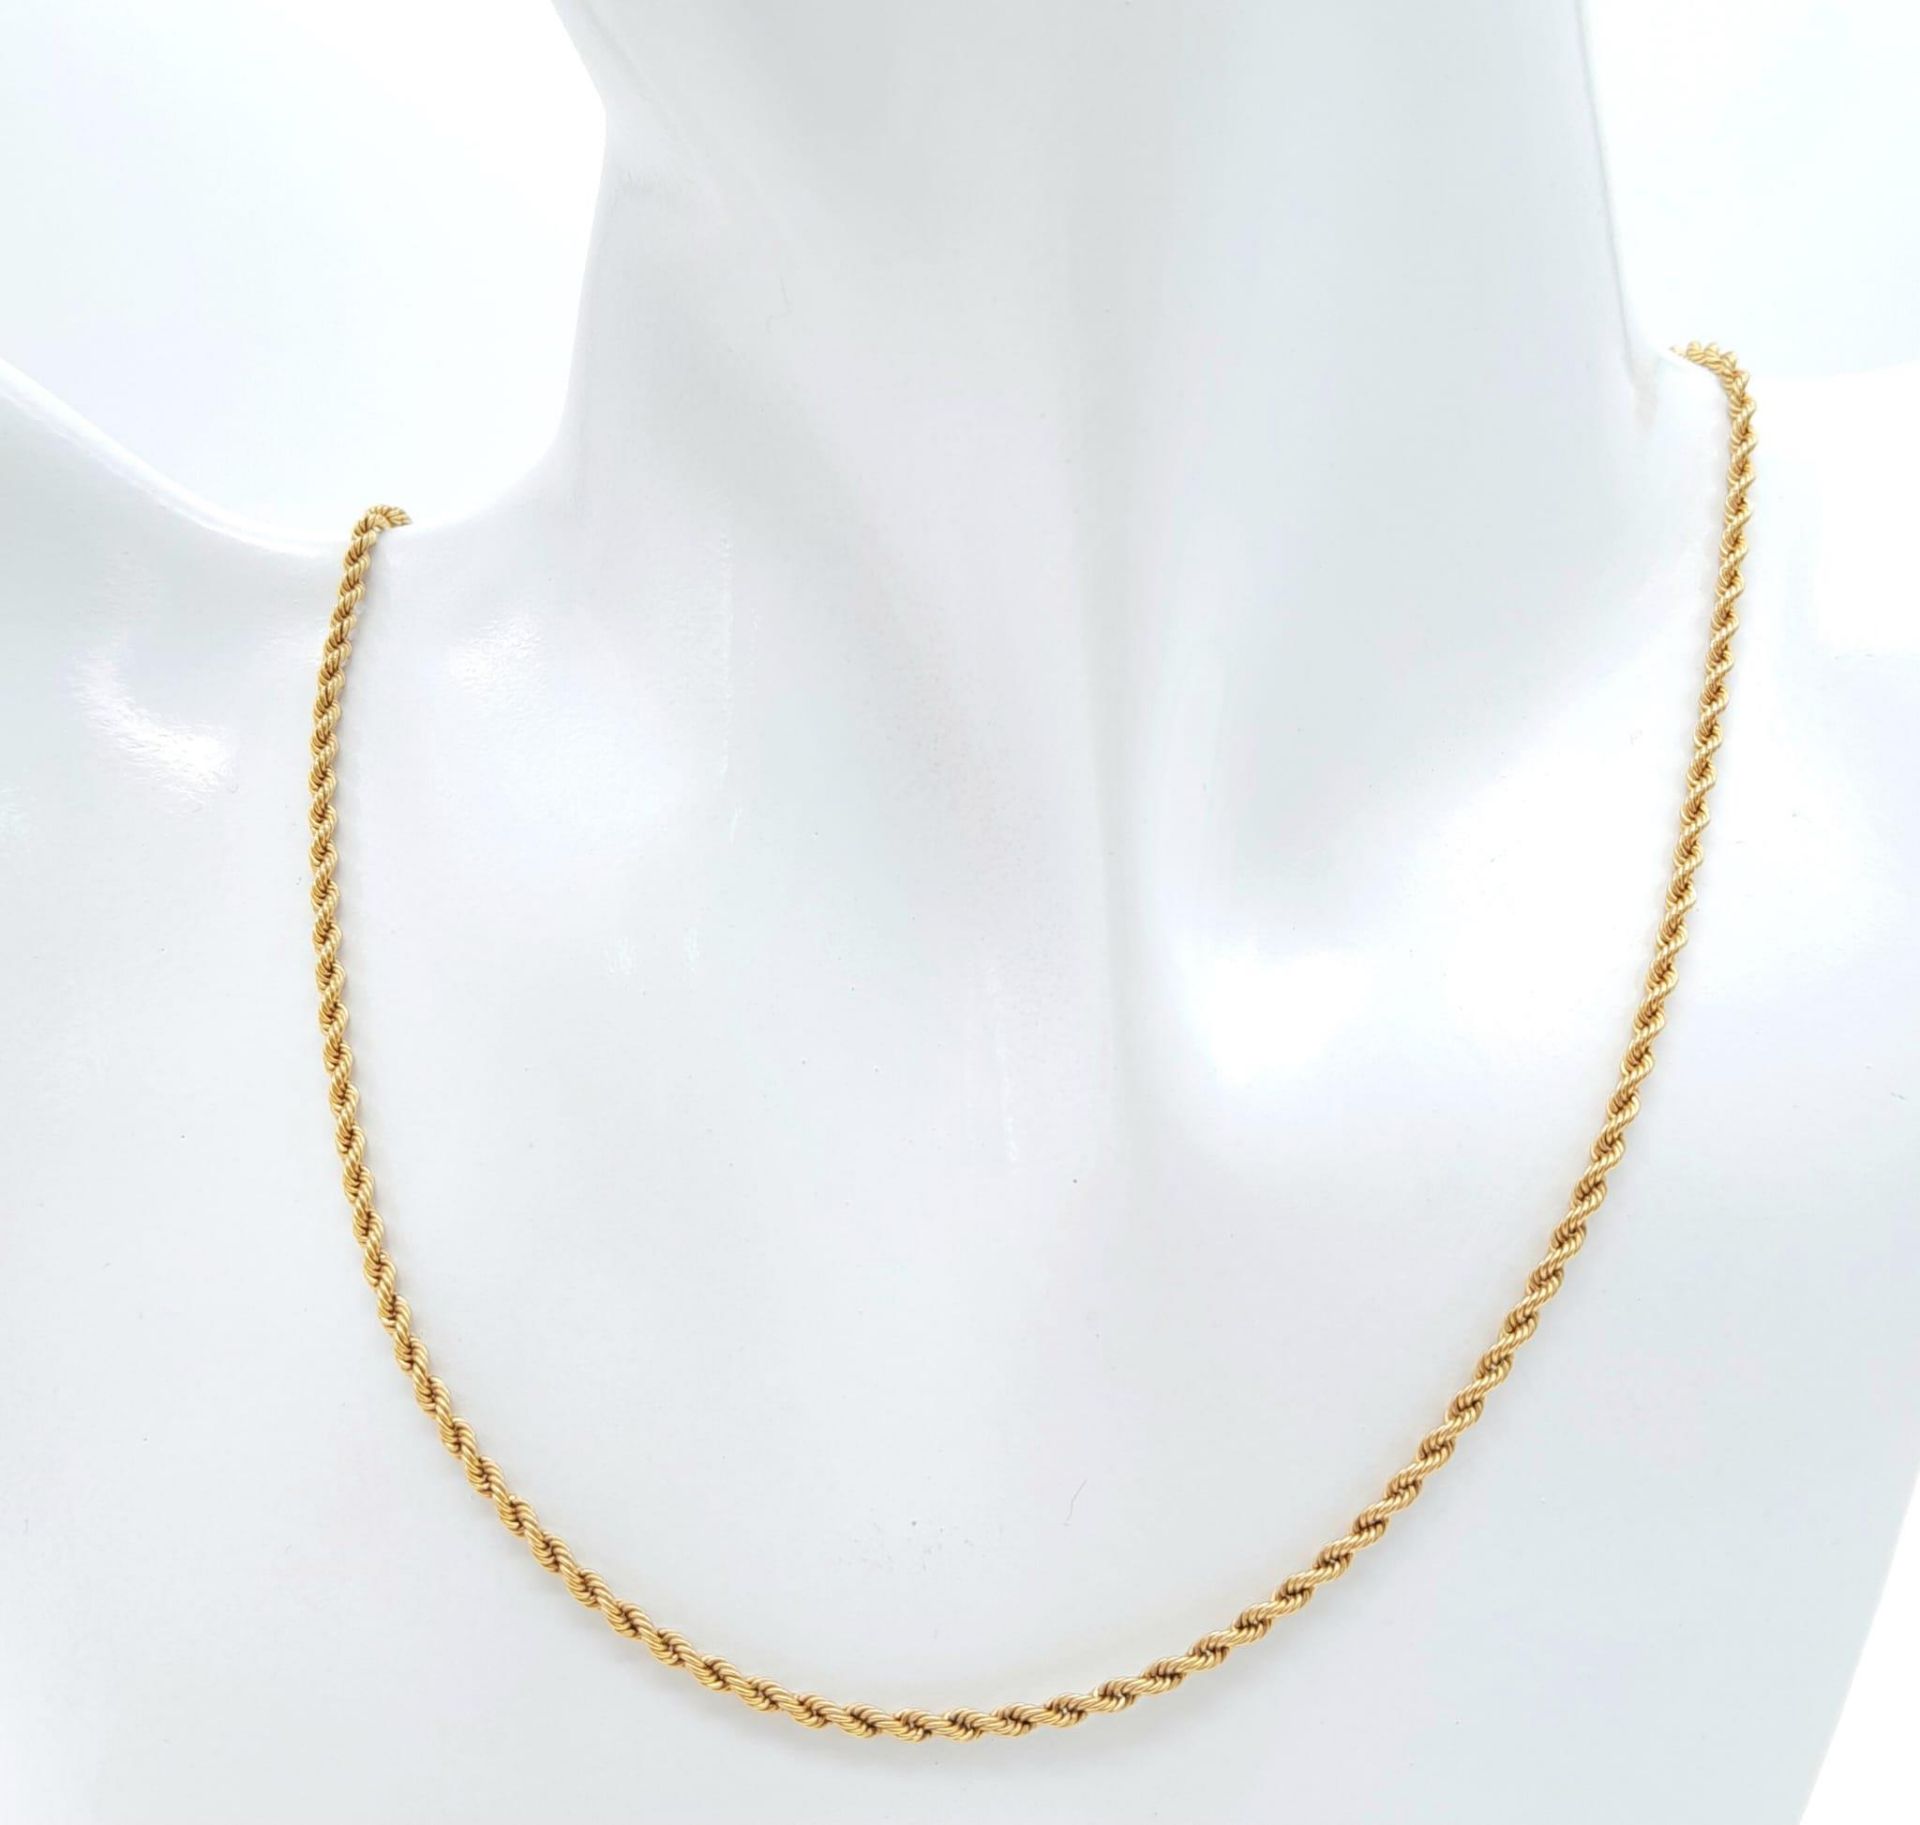 A 44cms 9k gold twist link neck chain . 7.4gms - Image 3 of 5